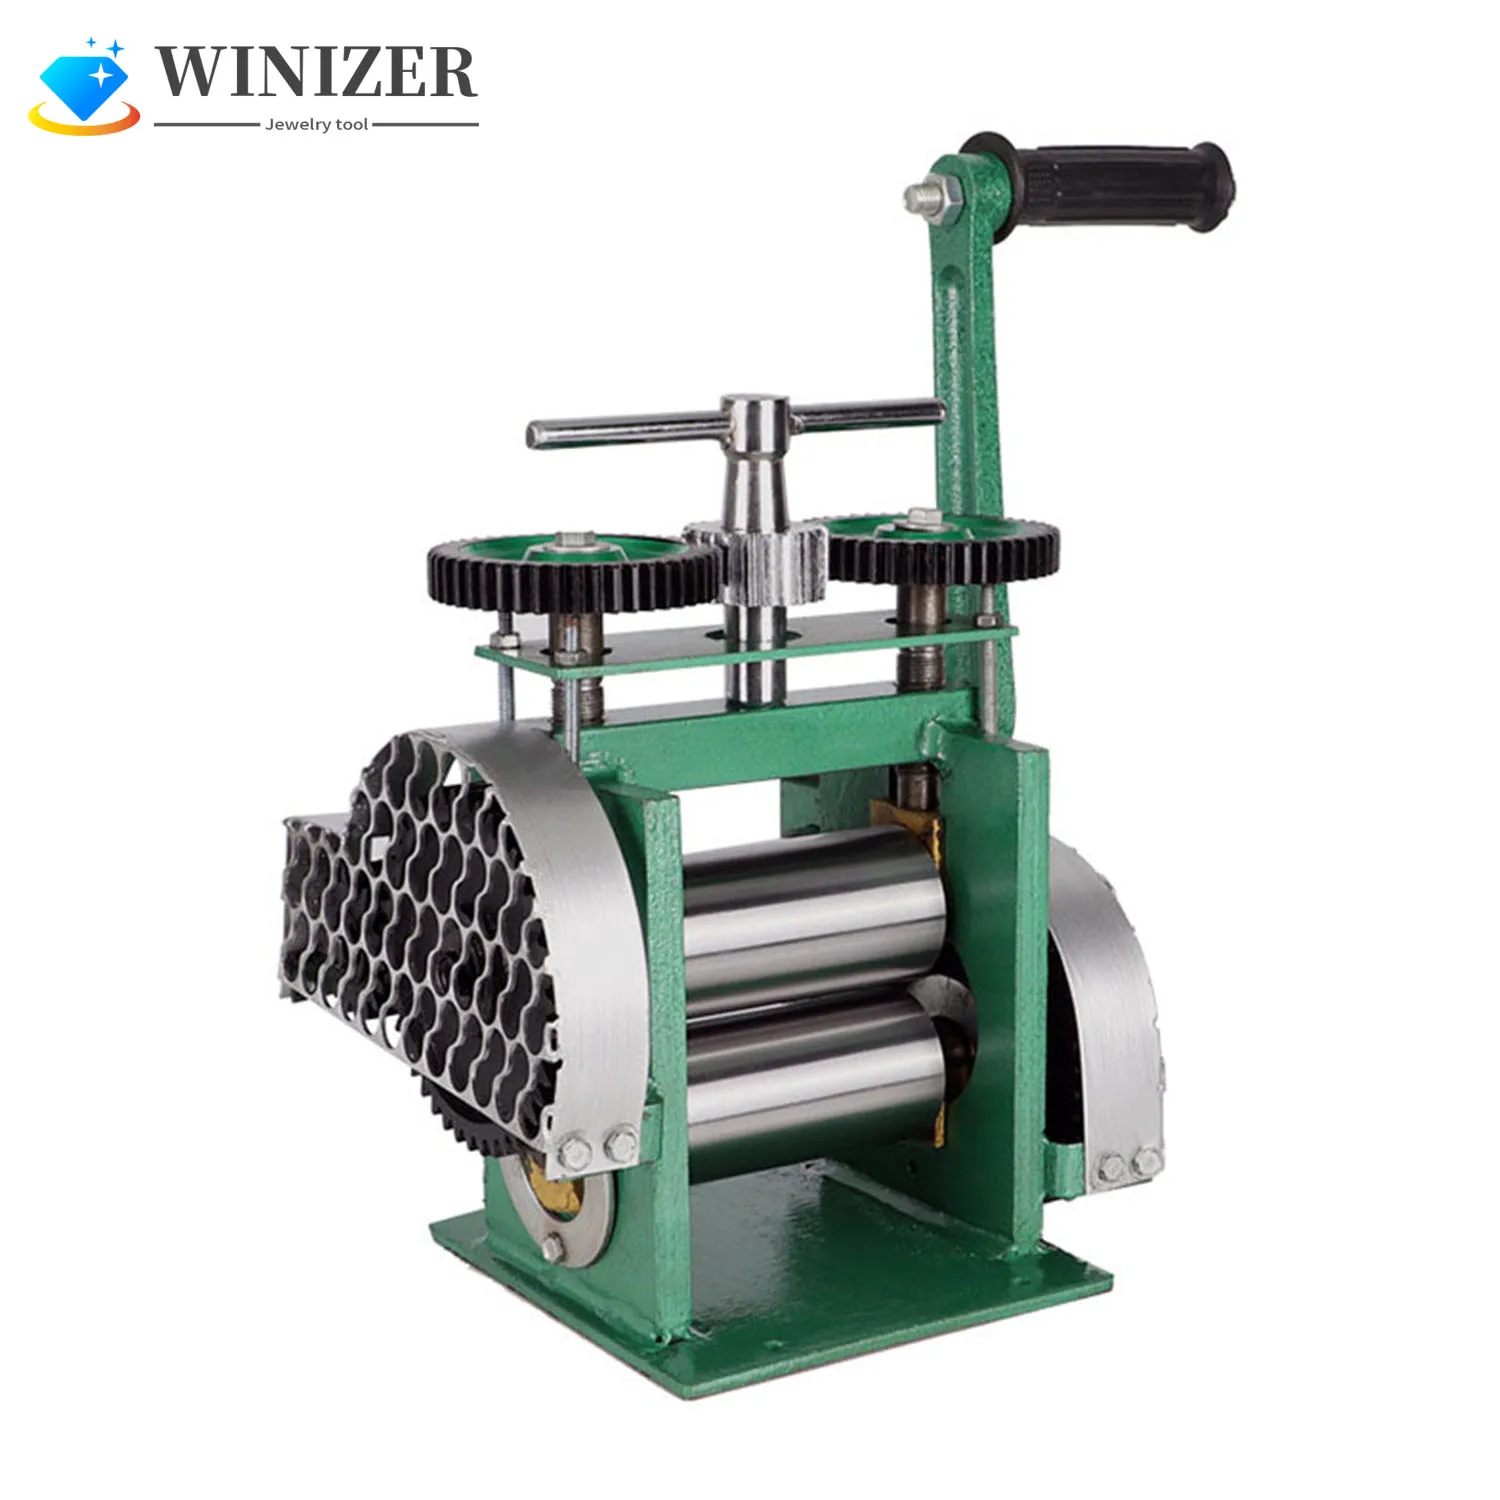 Rolling Mill Machine Jewelry Making Manual Hand Crank Tableting Jewelry Press Tool Upgraded Diy Tool Stainless  Manual Equipment